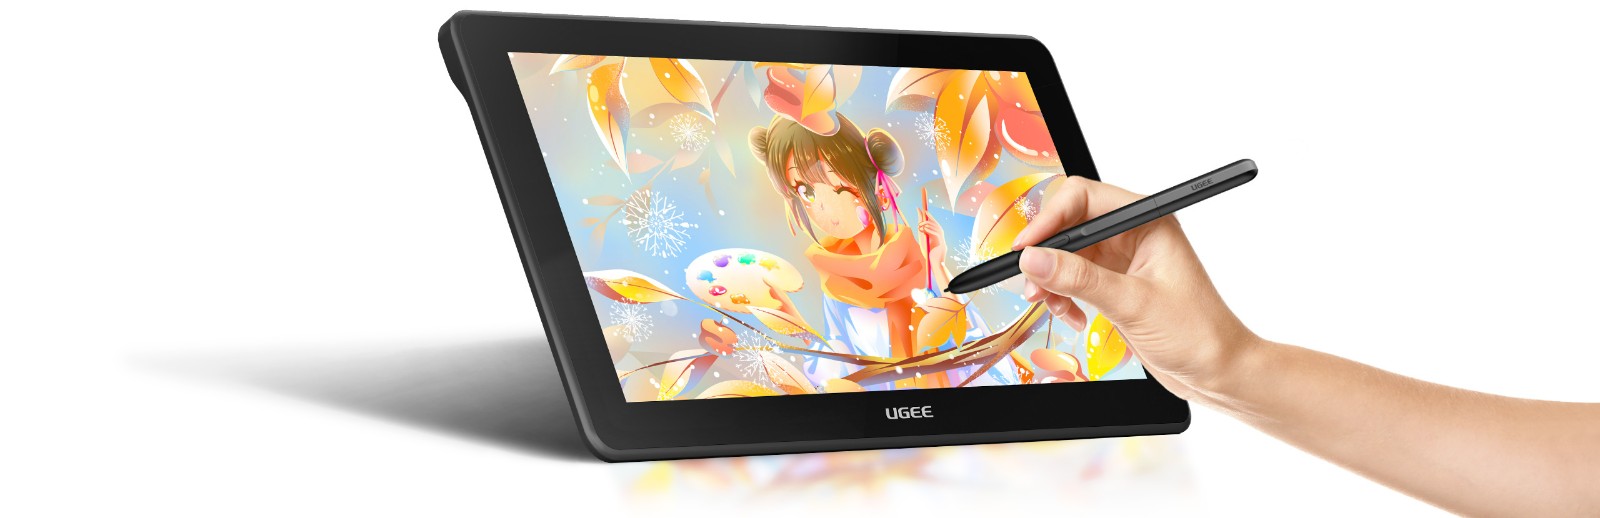 ugee draw tablet with screen